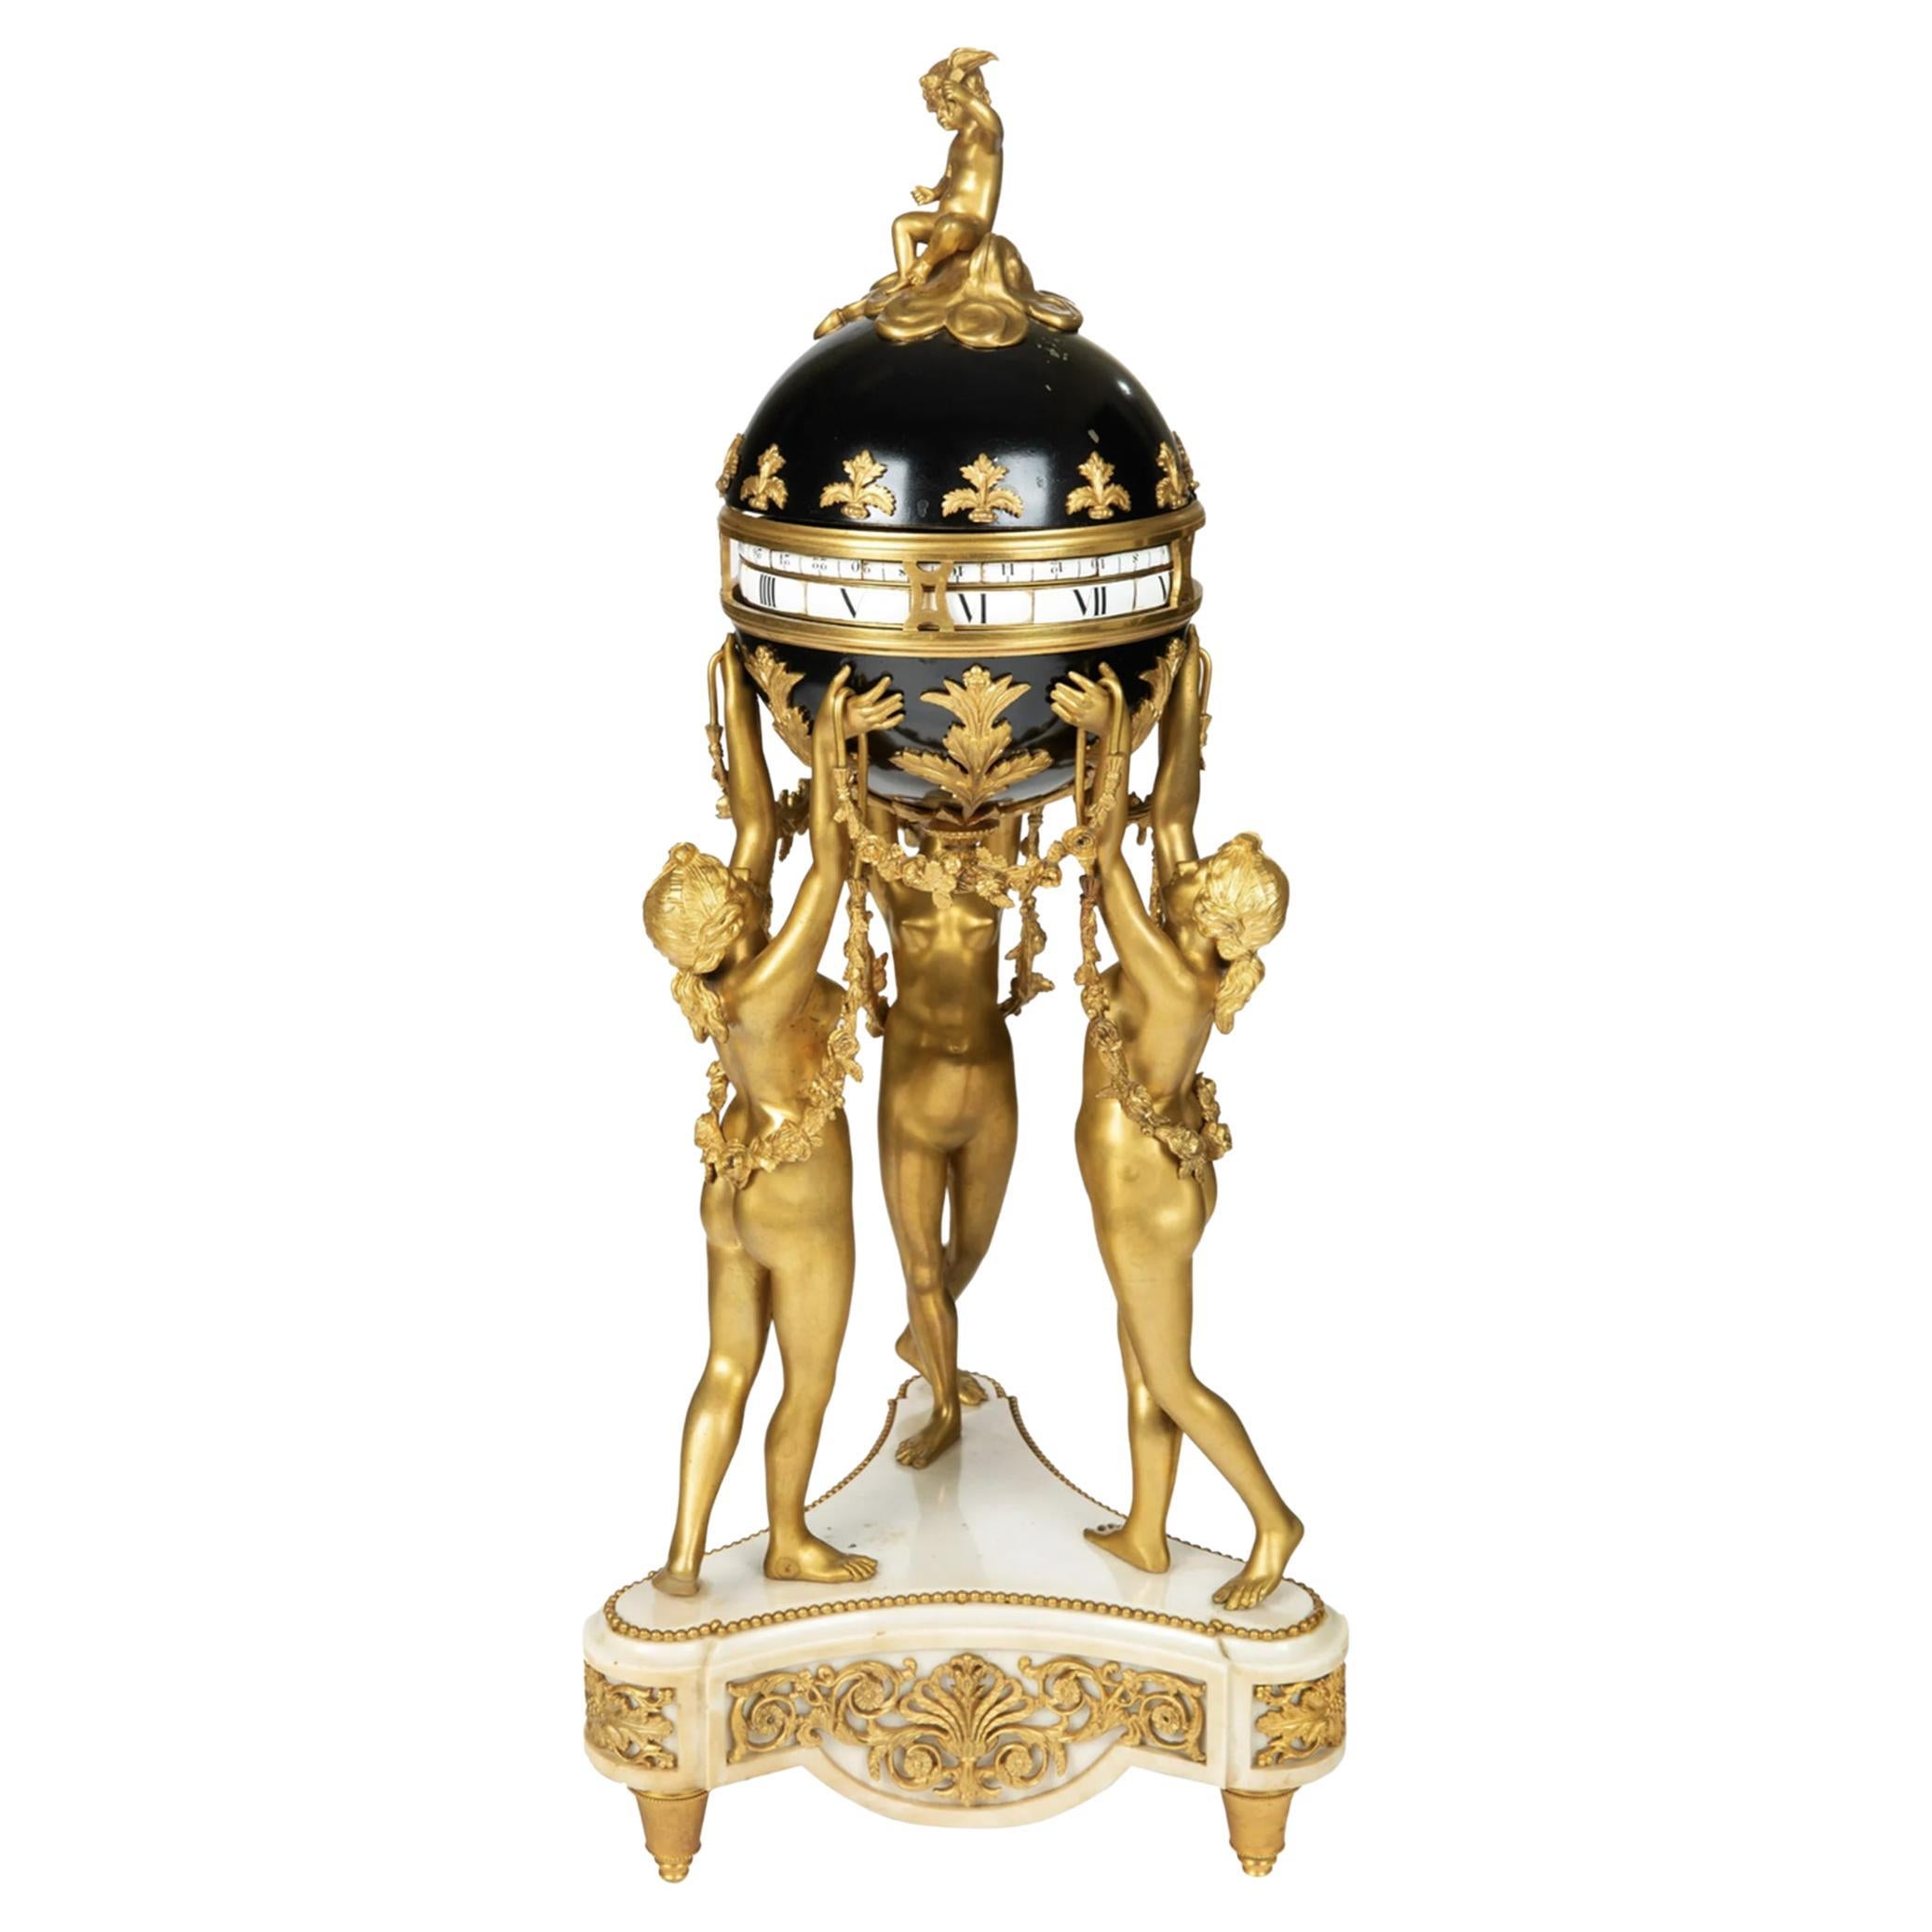 French Gilt Bronze and Mable Three Graces Clock by Samuel Marti & Cie For Sale